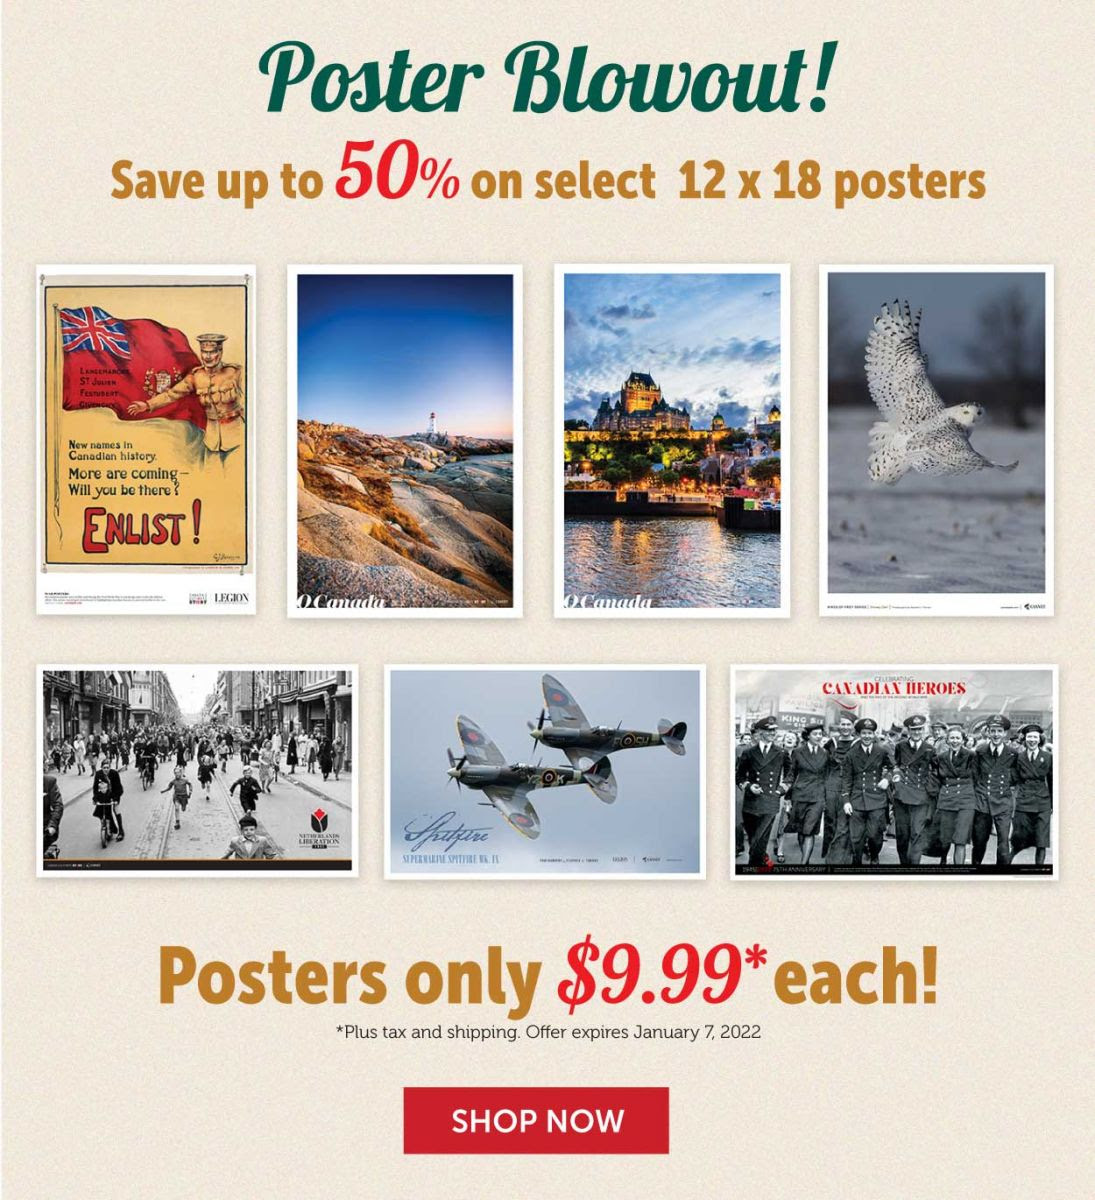 Poster Blowout!